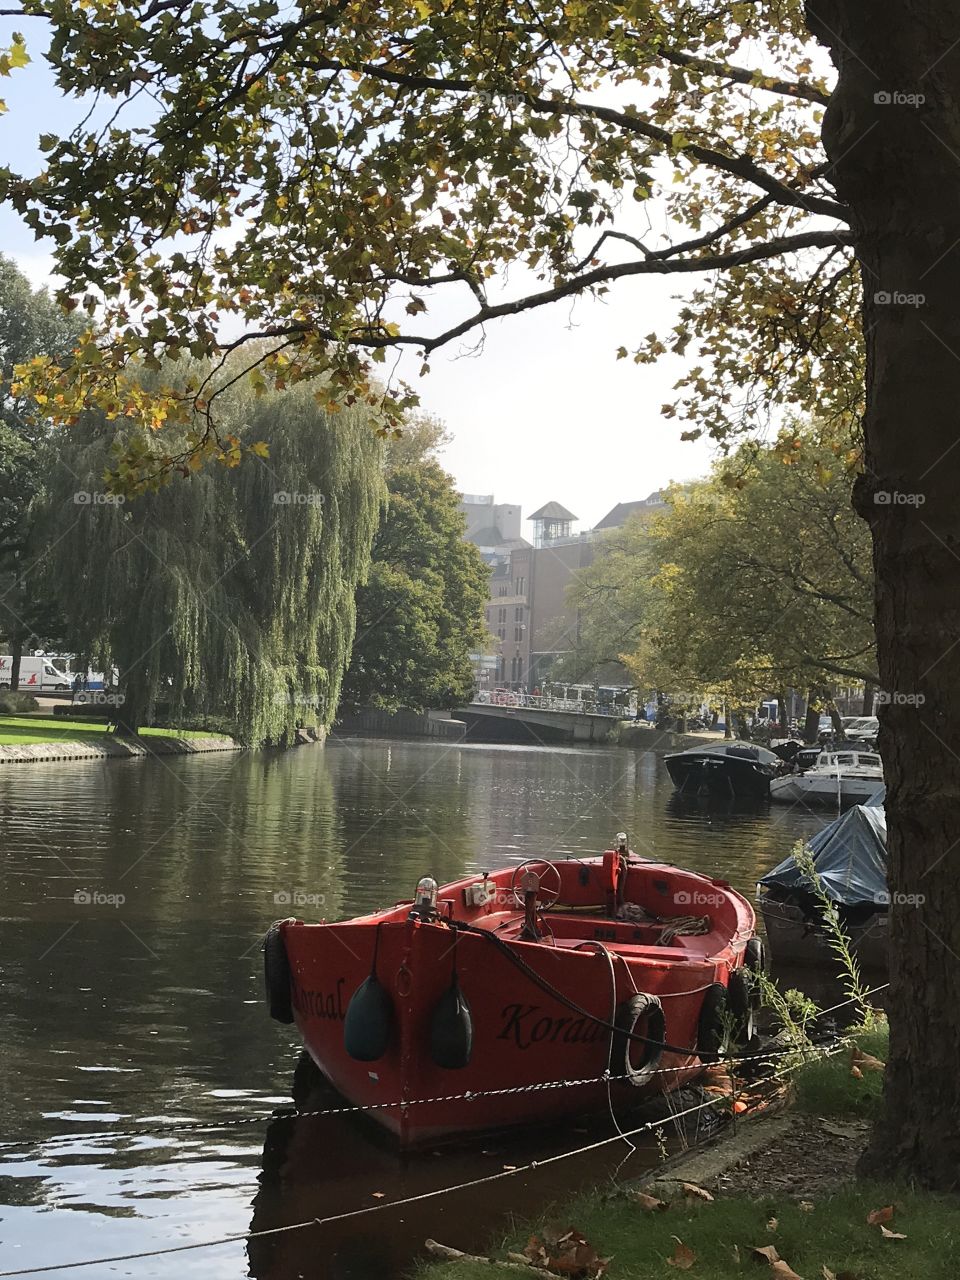 Willow trees and street view of the canals in Amsterdam 